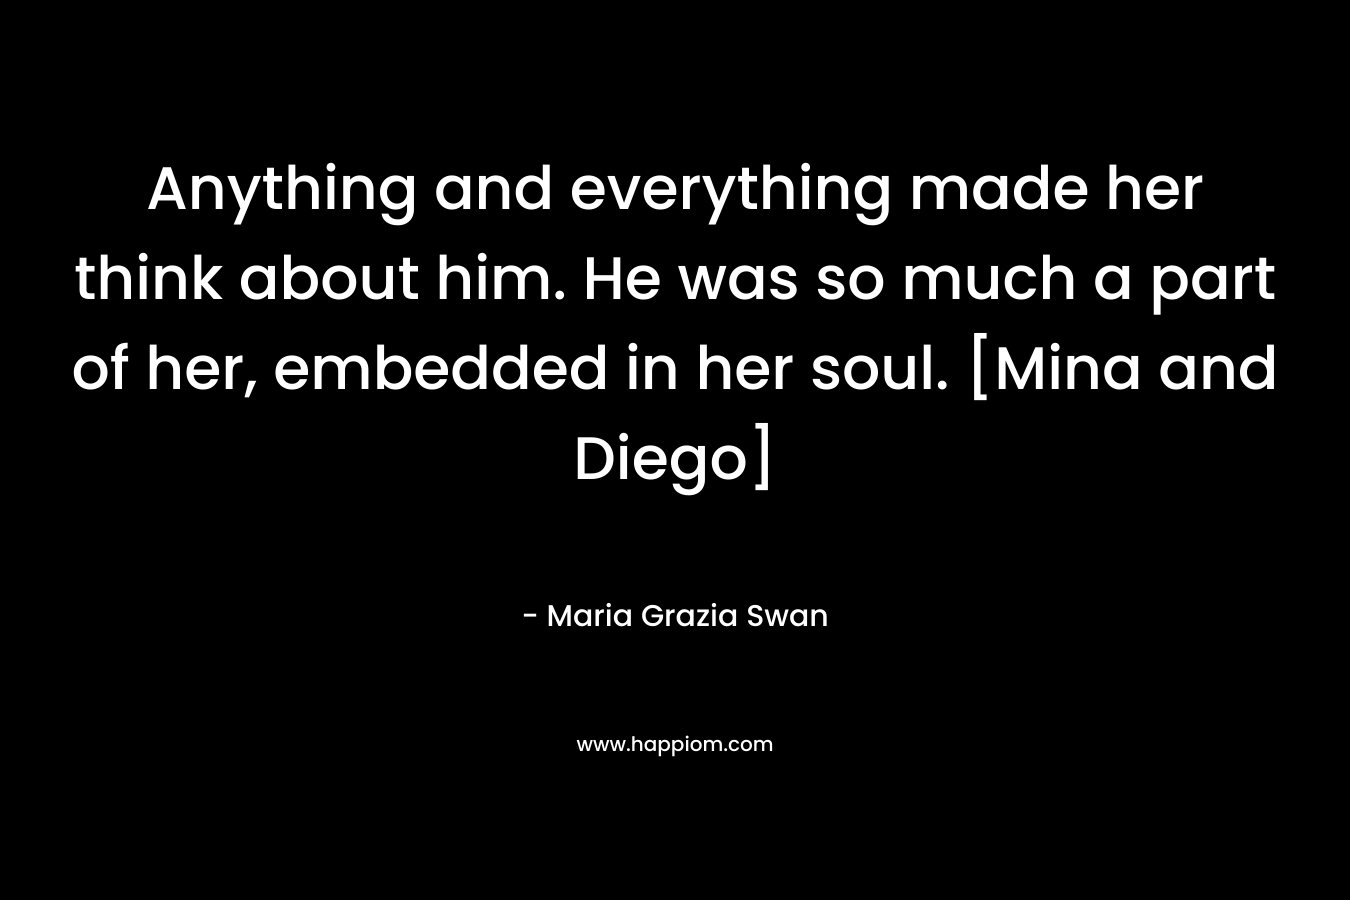 Anything and everything made her think about him. He was so much a part of her, embedded in her soul. [Mina and Diego] – Maria Grazia Swan